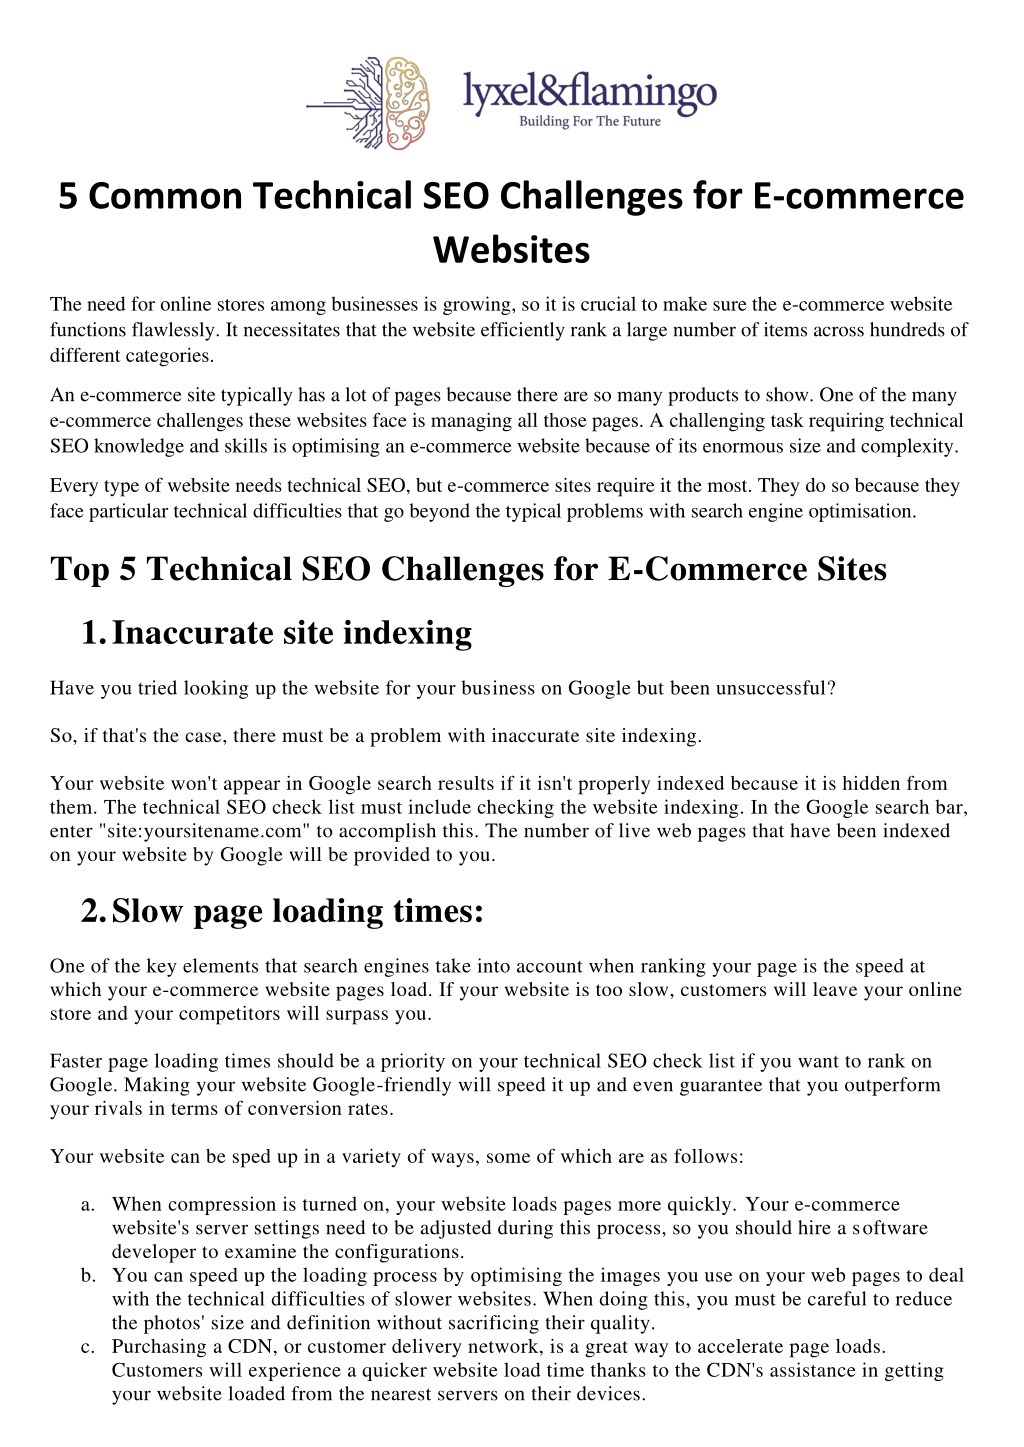 PPT - Technical SEO Challenges for E-Commerce Websites- A Guide by ...